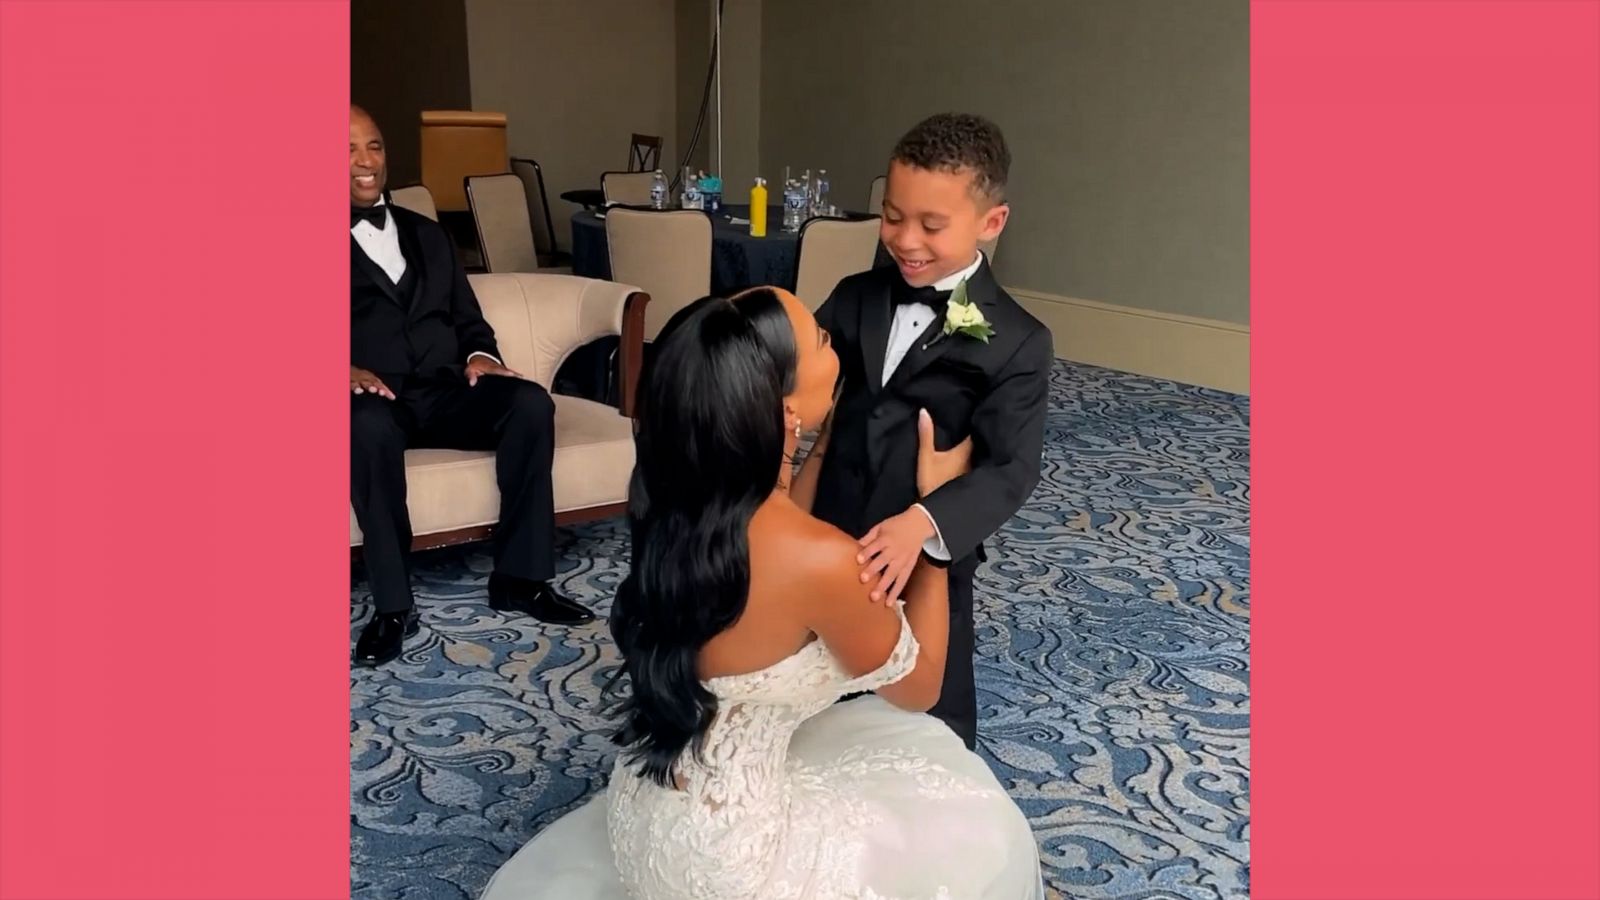 VIDEO: Bride shares sweet first look moment with her 'bonus son' before wedding